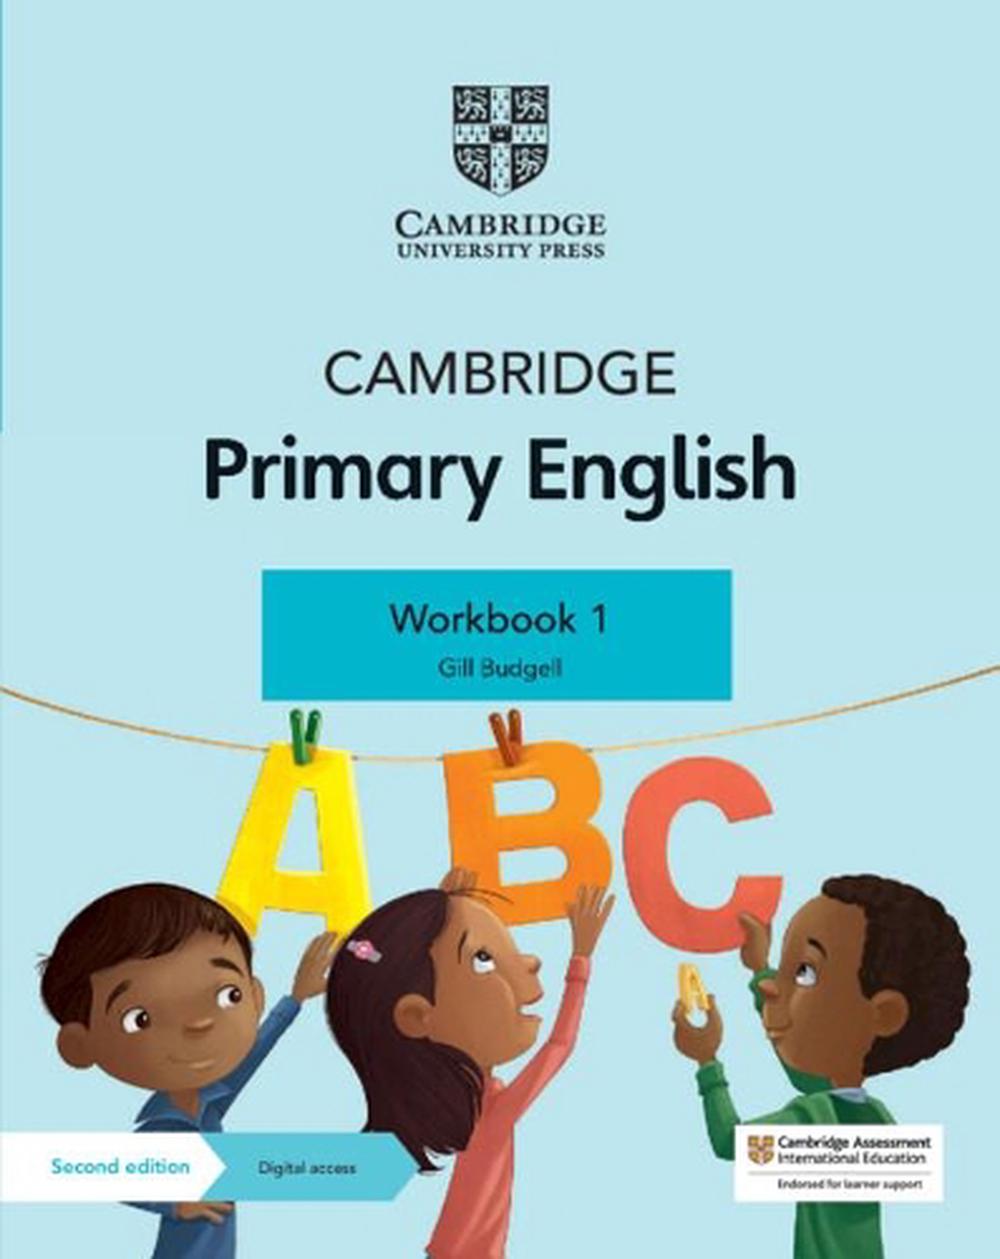 Cambridge Primary English Workbook 1 with Digital Access (1 Year) by